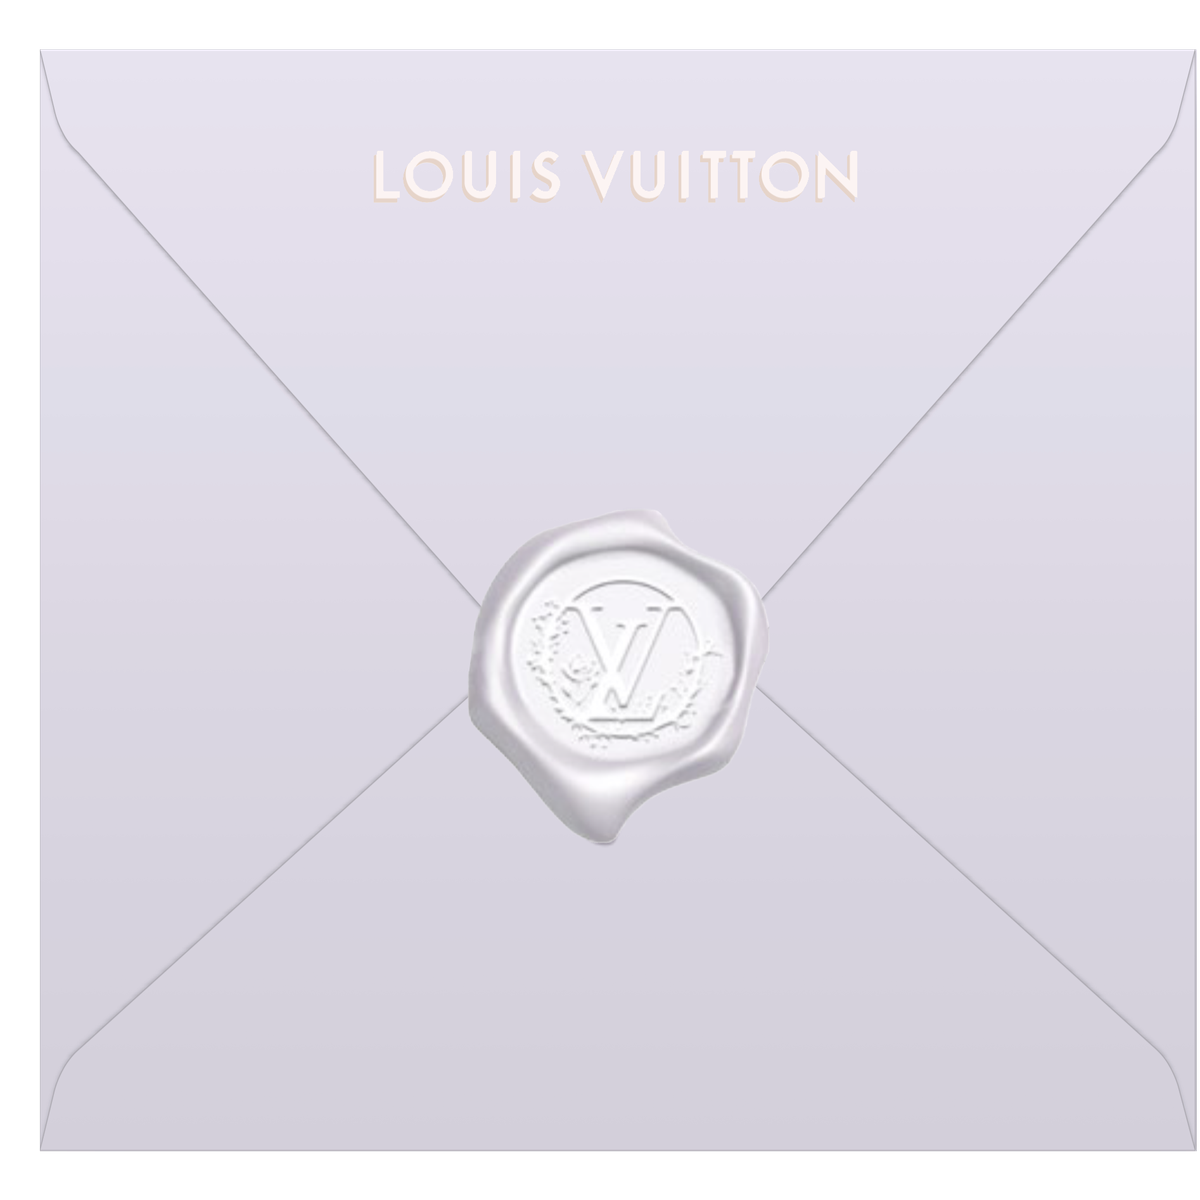 Unboxing Face knit Mask from Louis Vuitton 